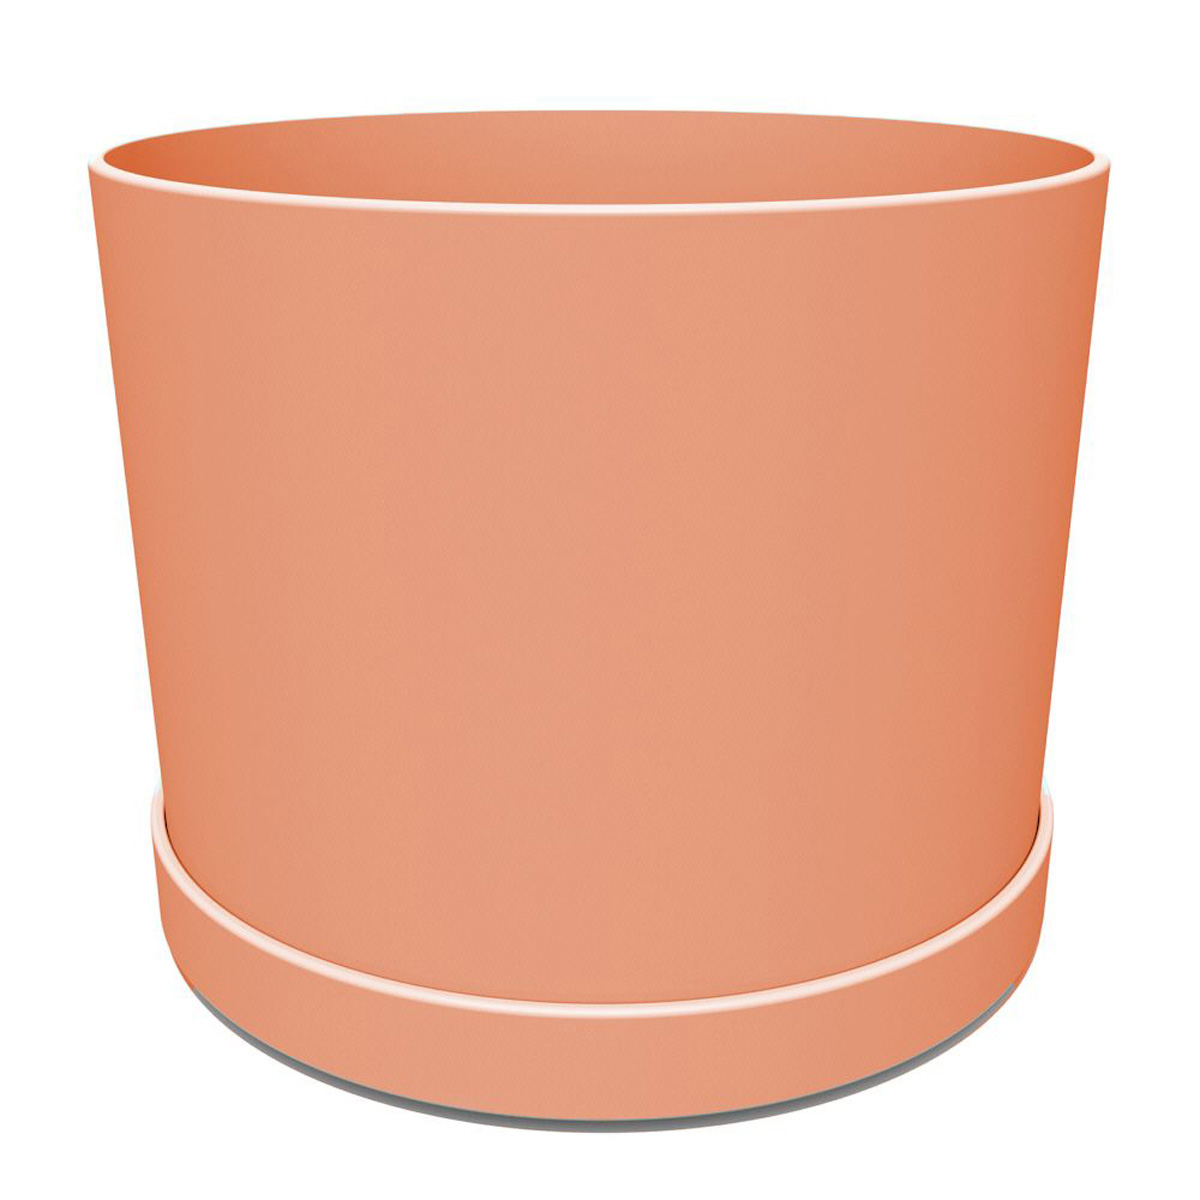 Picture of 12" Mathers Muted Terra Cotta Planter